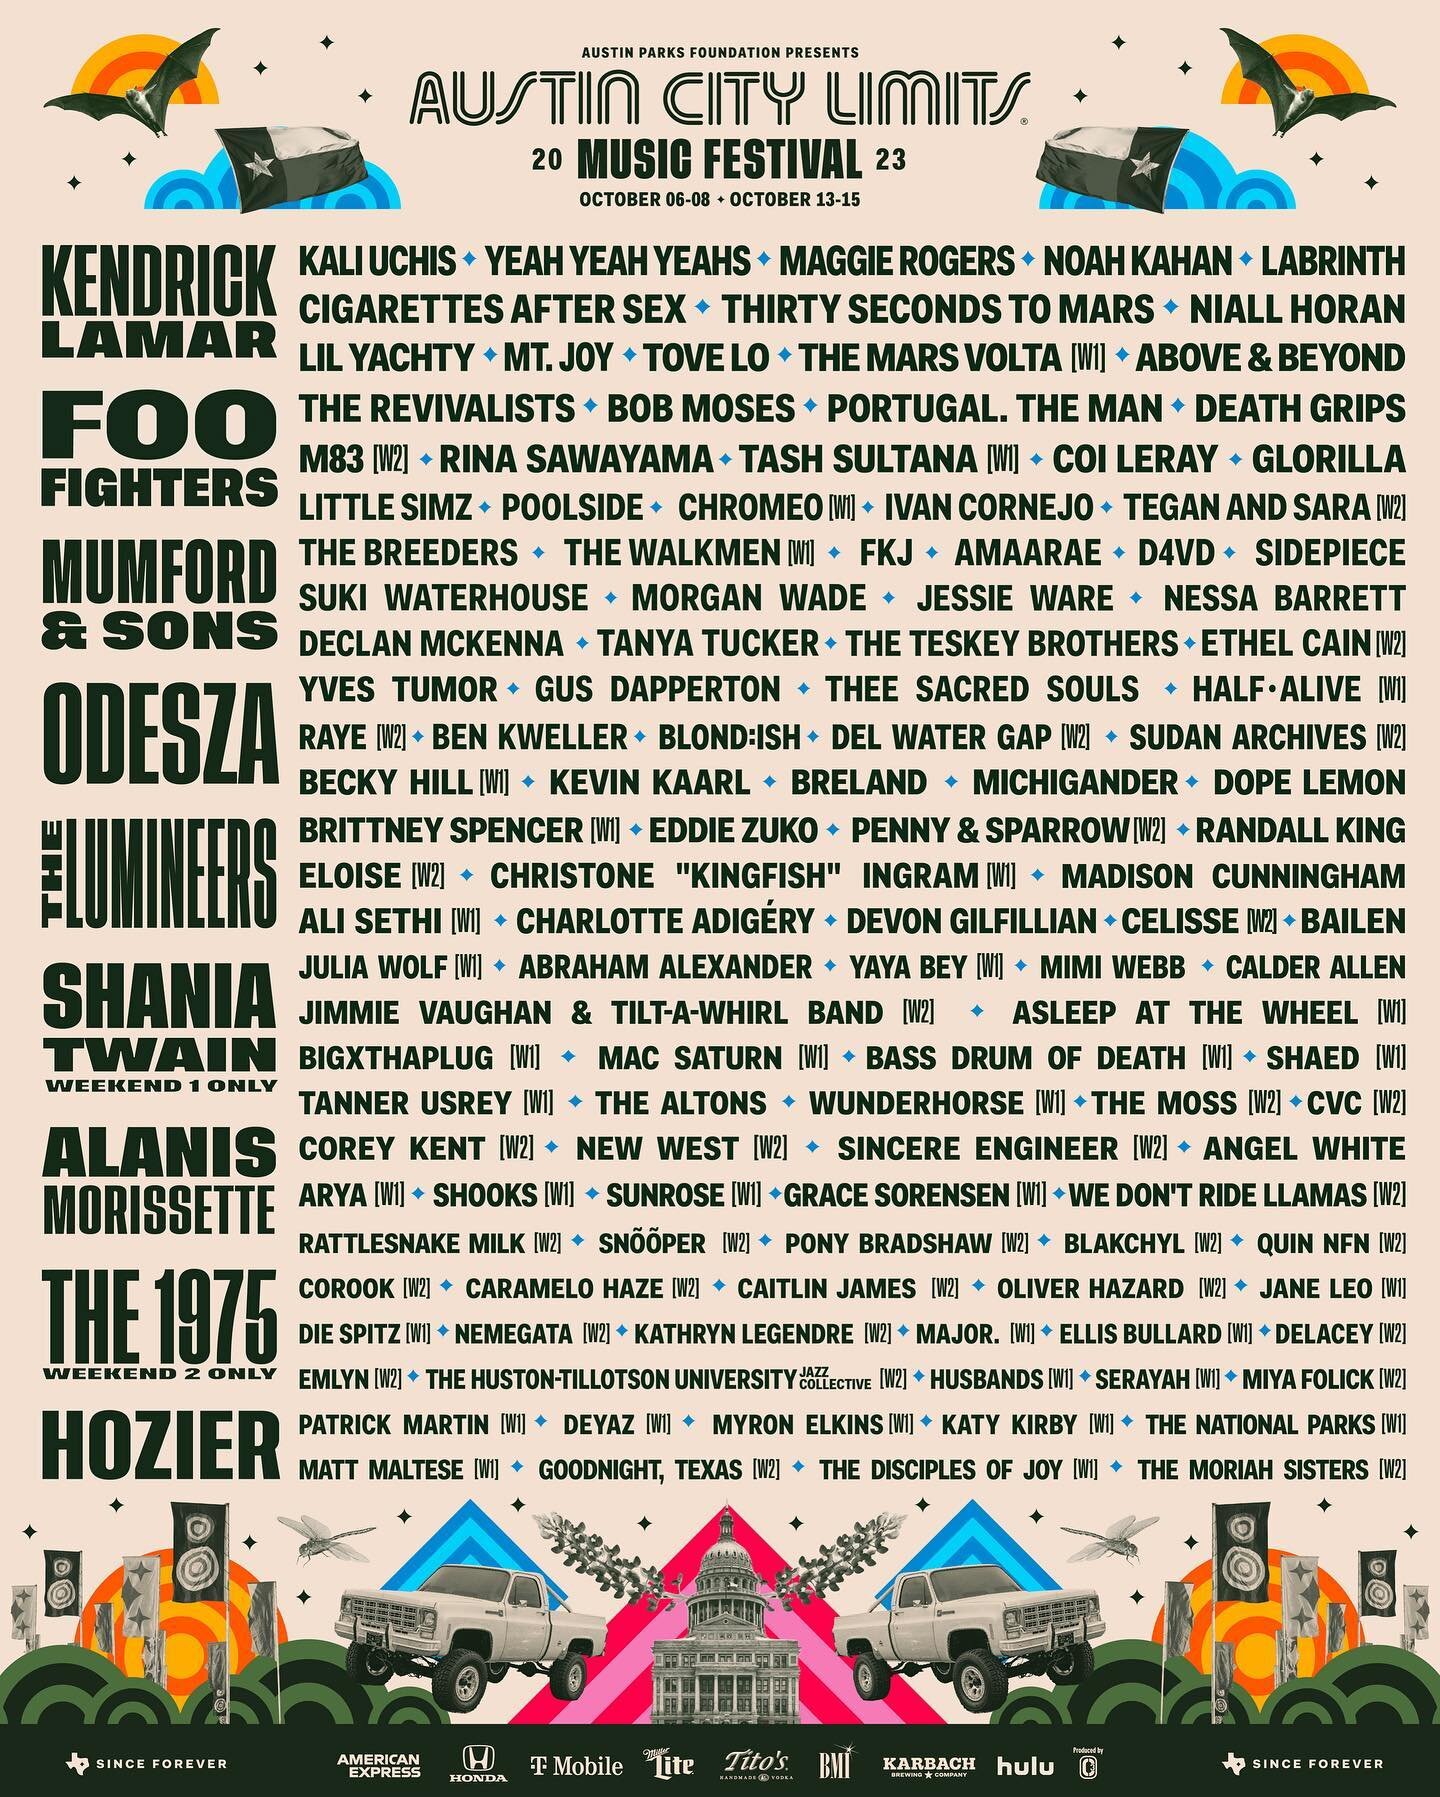 Husbands will be at @aclfestival this year!